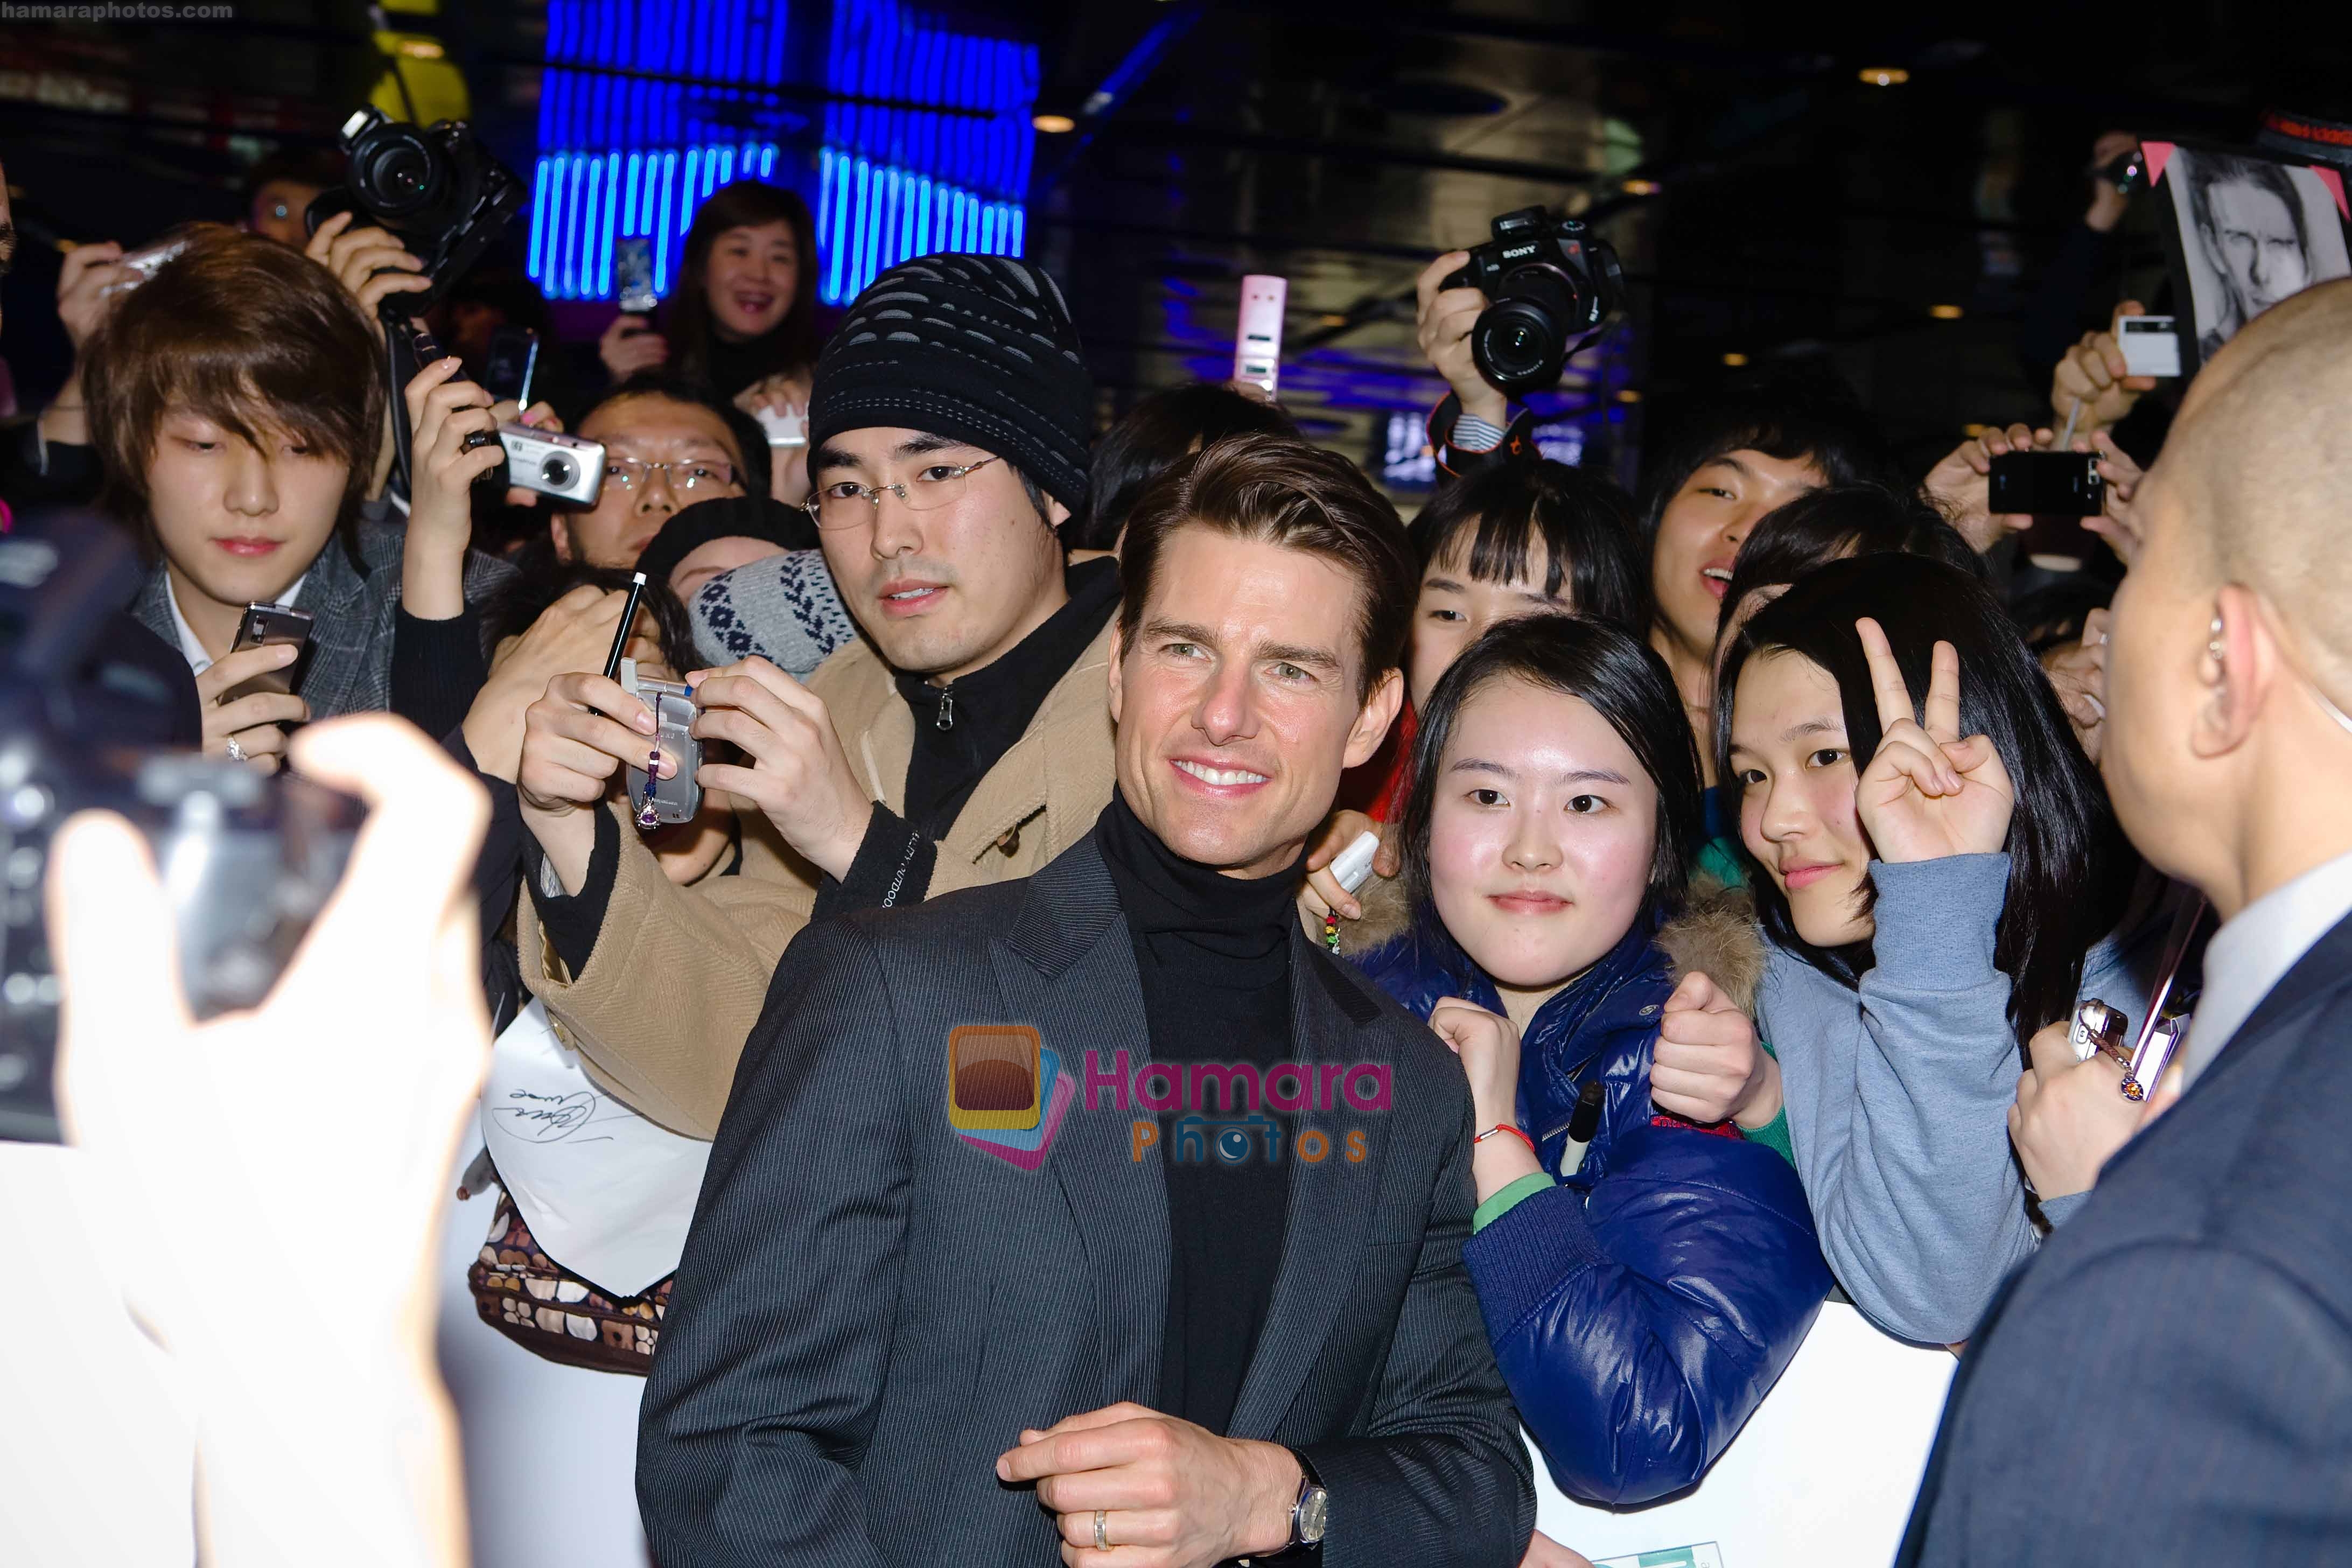 Tom Cruise at a recent promotional event for his forthcoming film Valkyrie in Korea